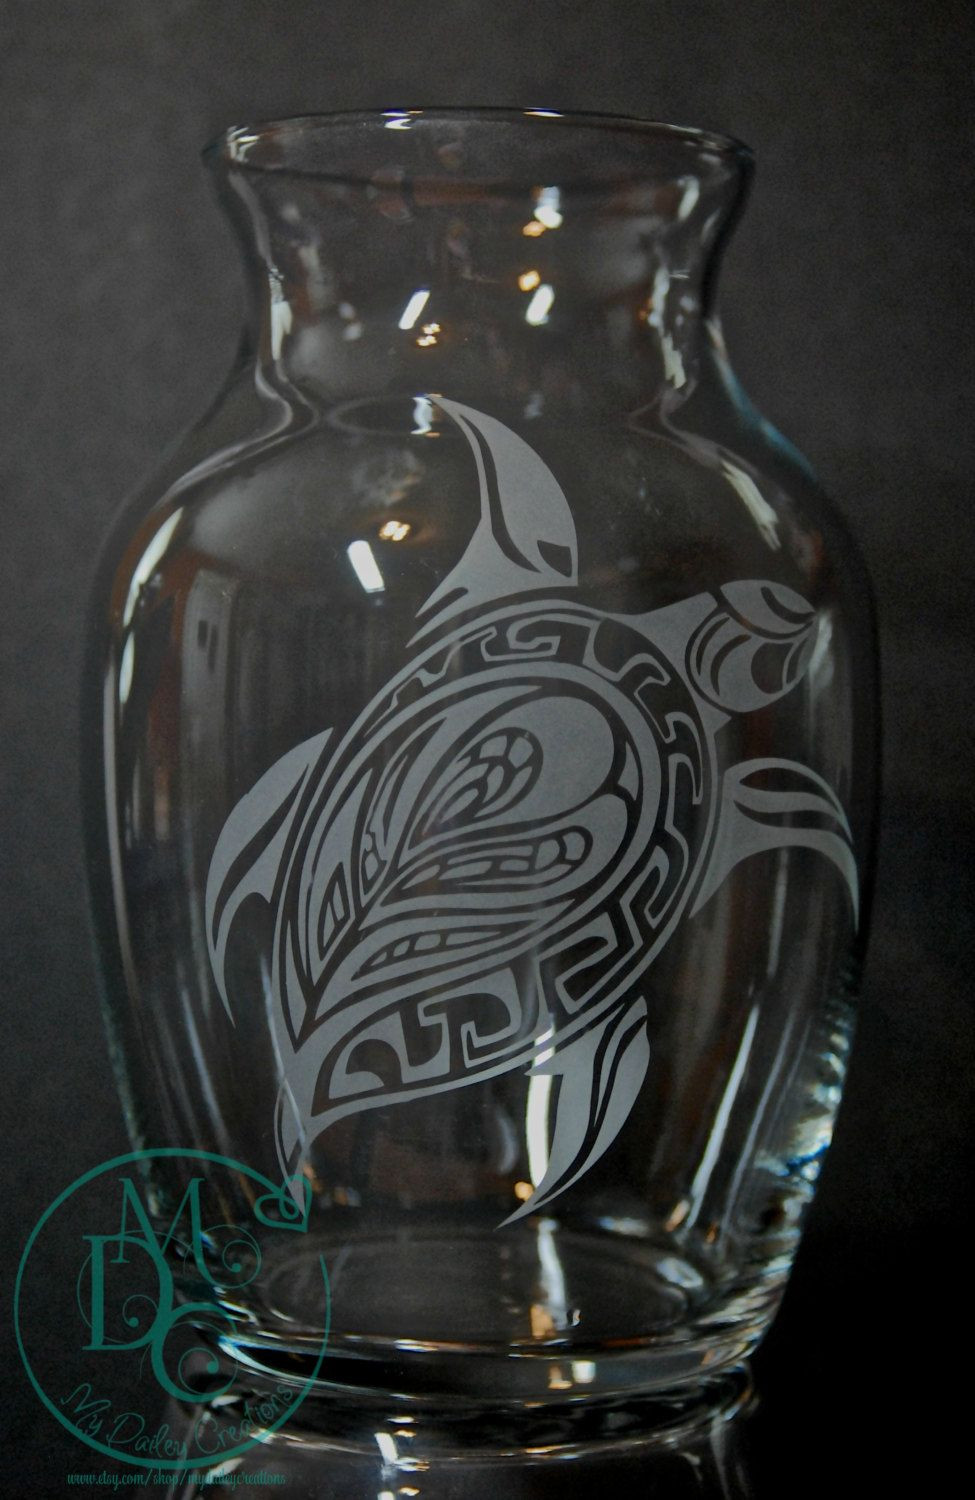 personalized glass vase of tribal sea turtle vase glass etched vase etched glass gifts with regard to glass etched sea turtle vase sandblasted sand carved glass art glass etching beach pinned by pin4etsy com